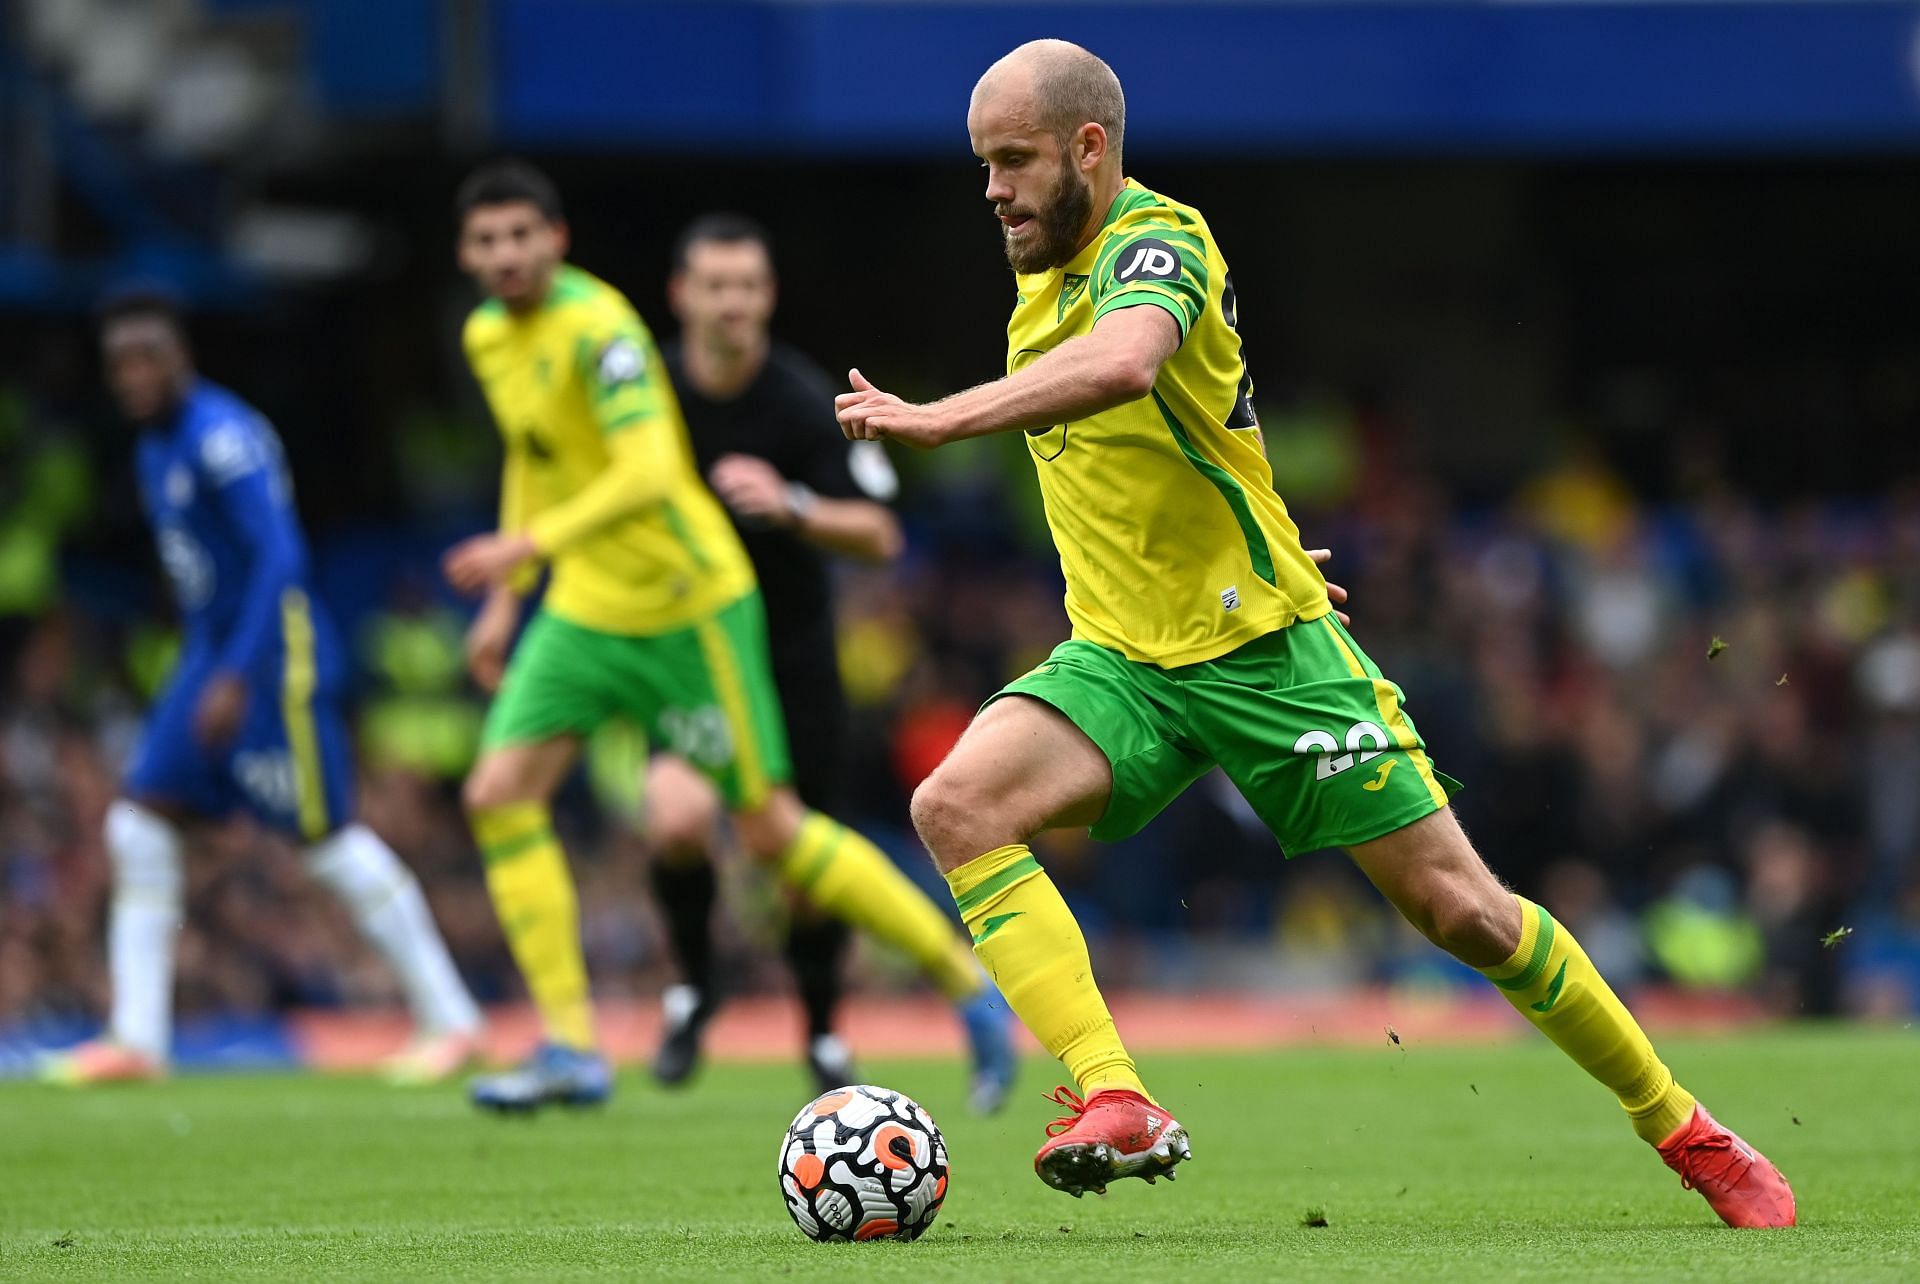 Norwich City take on Leeds United in a Premier League game on Sunday